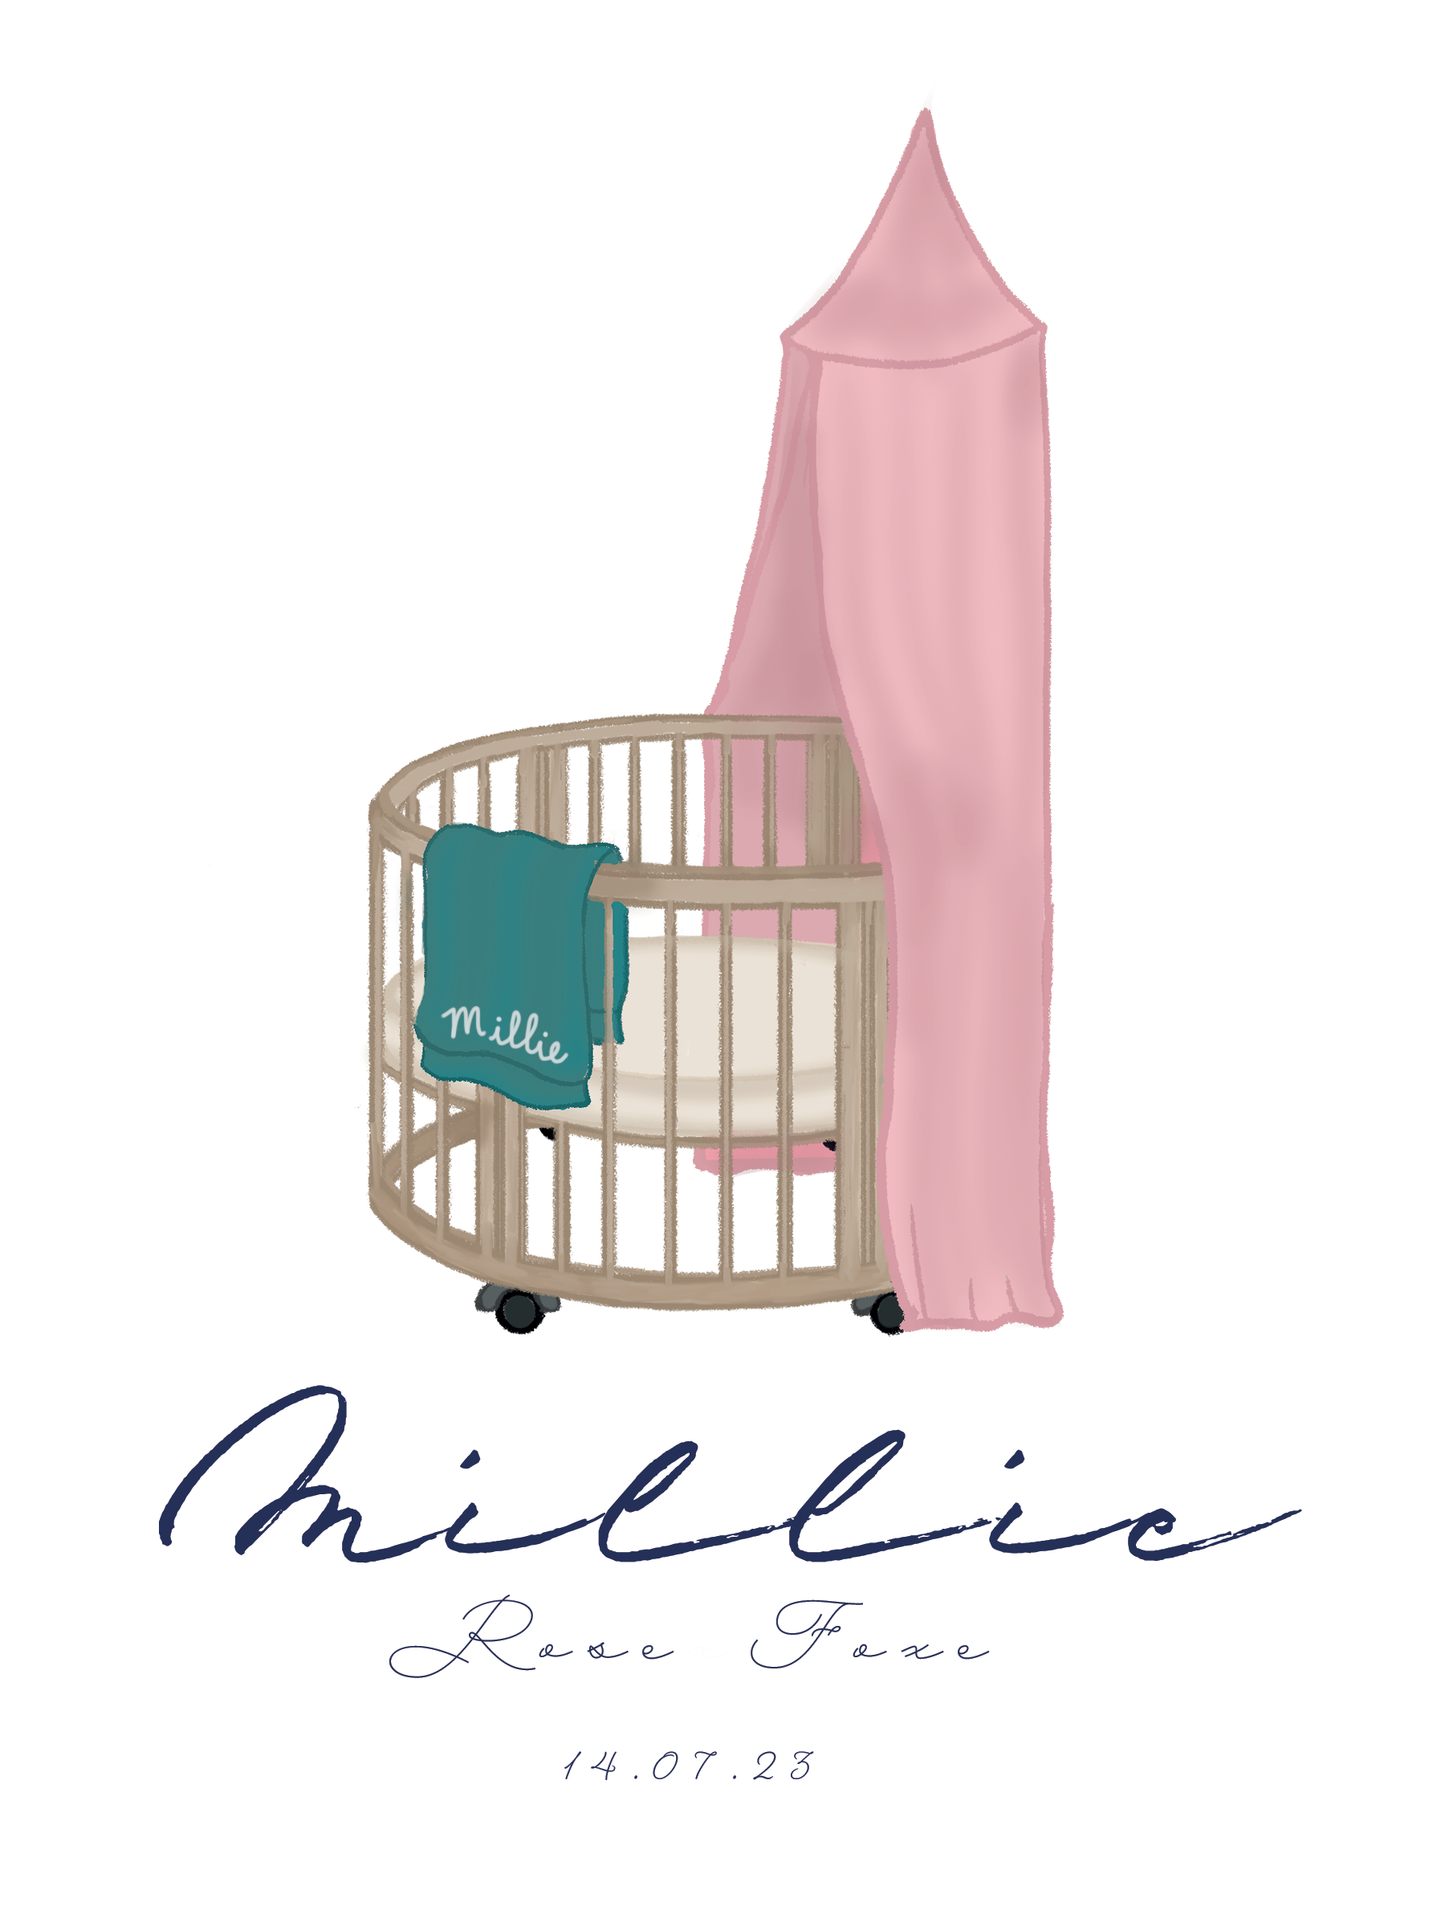 My Crib & Canopy - Rose Pink & Teal